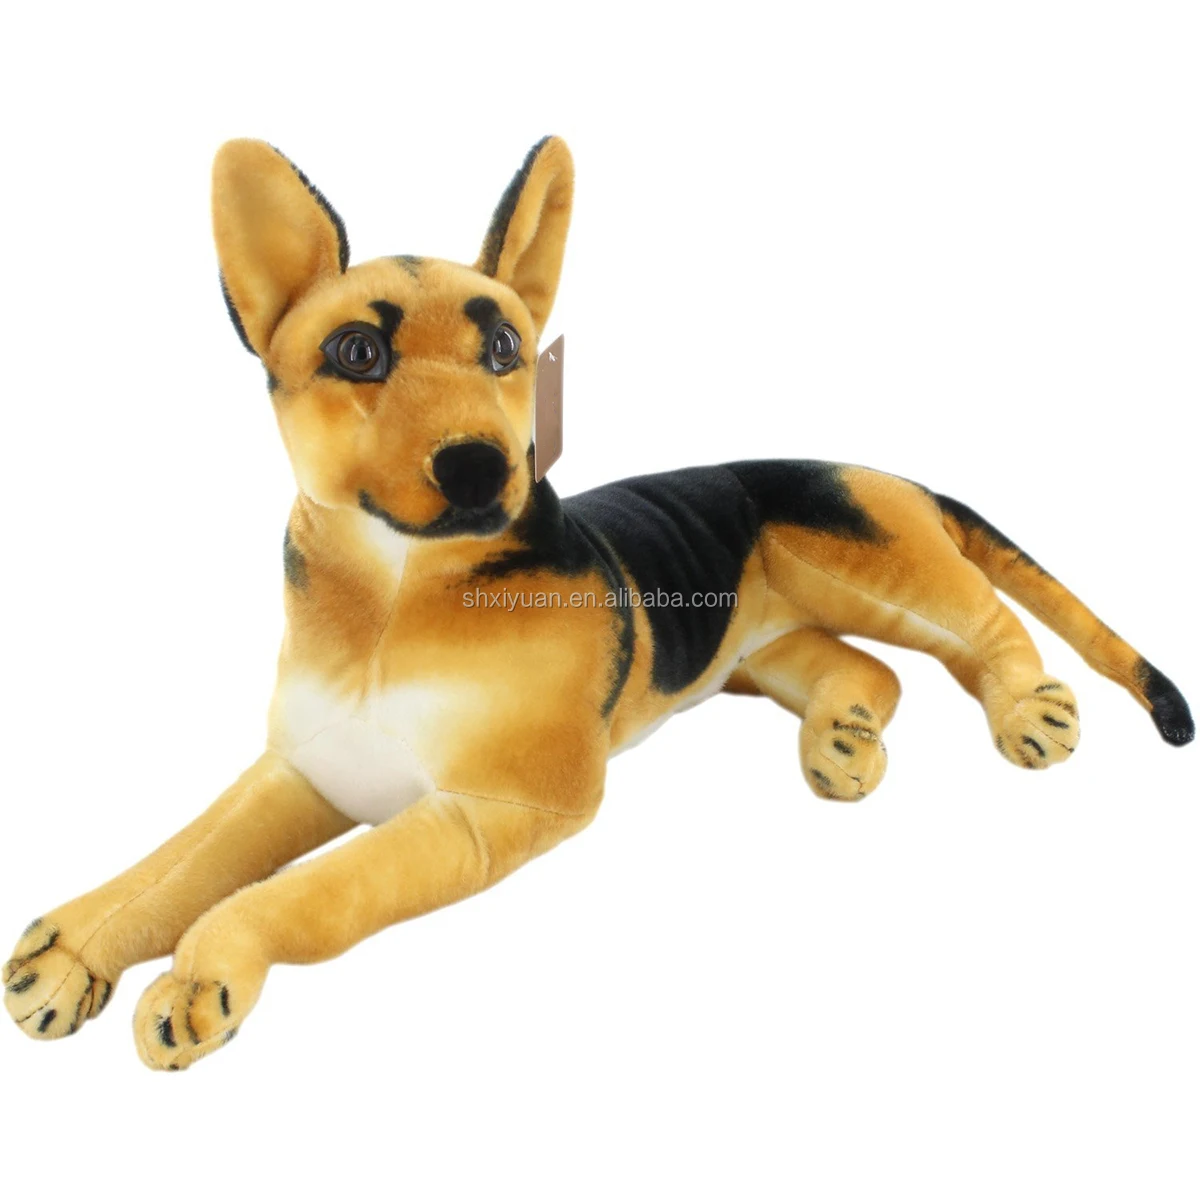 best selling big <strong>realistic</strong> stuffed animals dog toy german